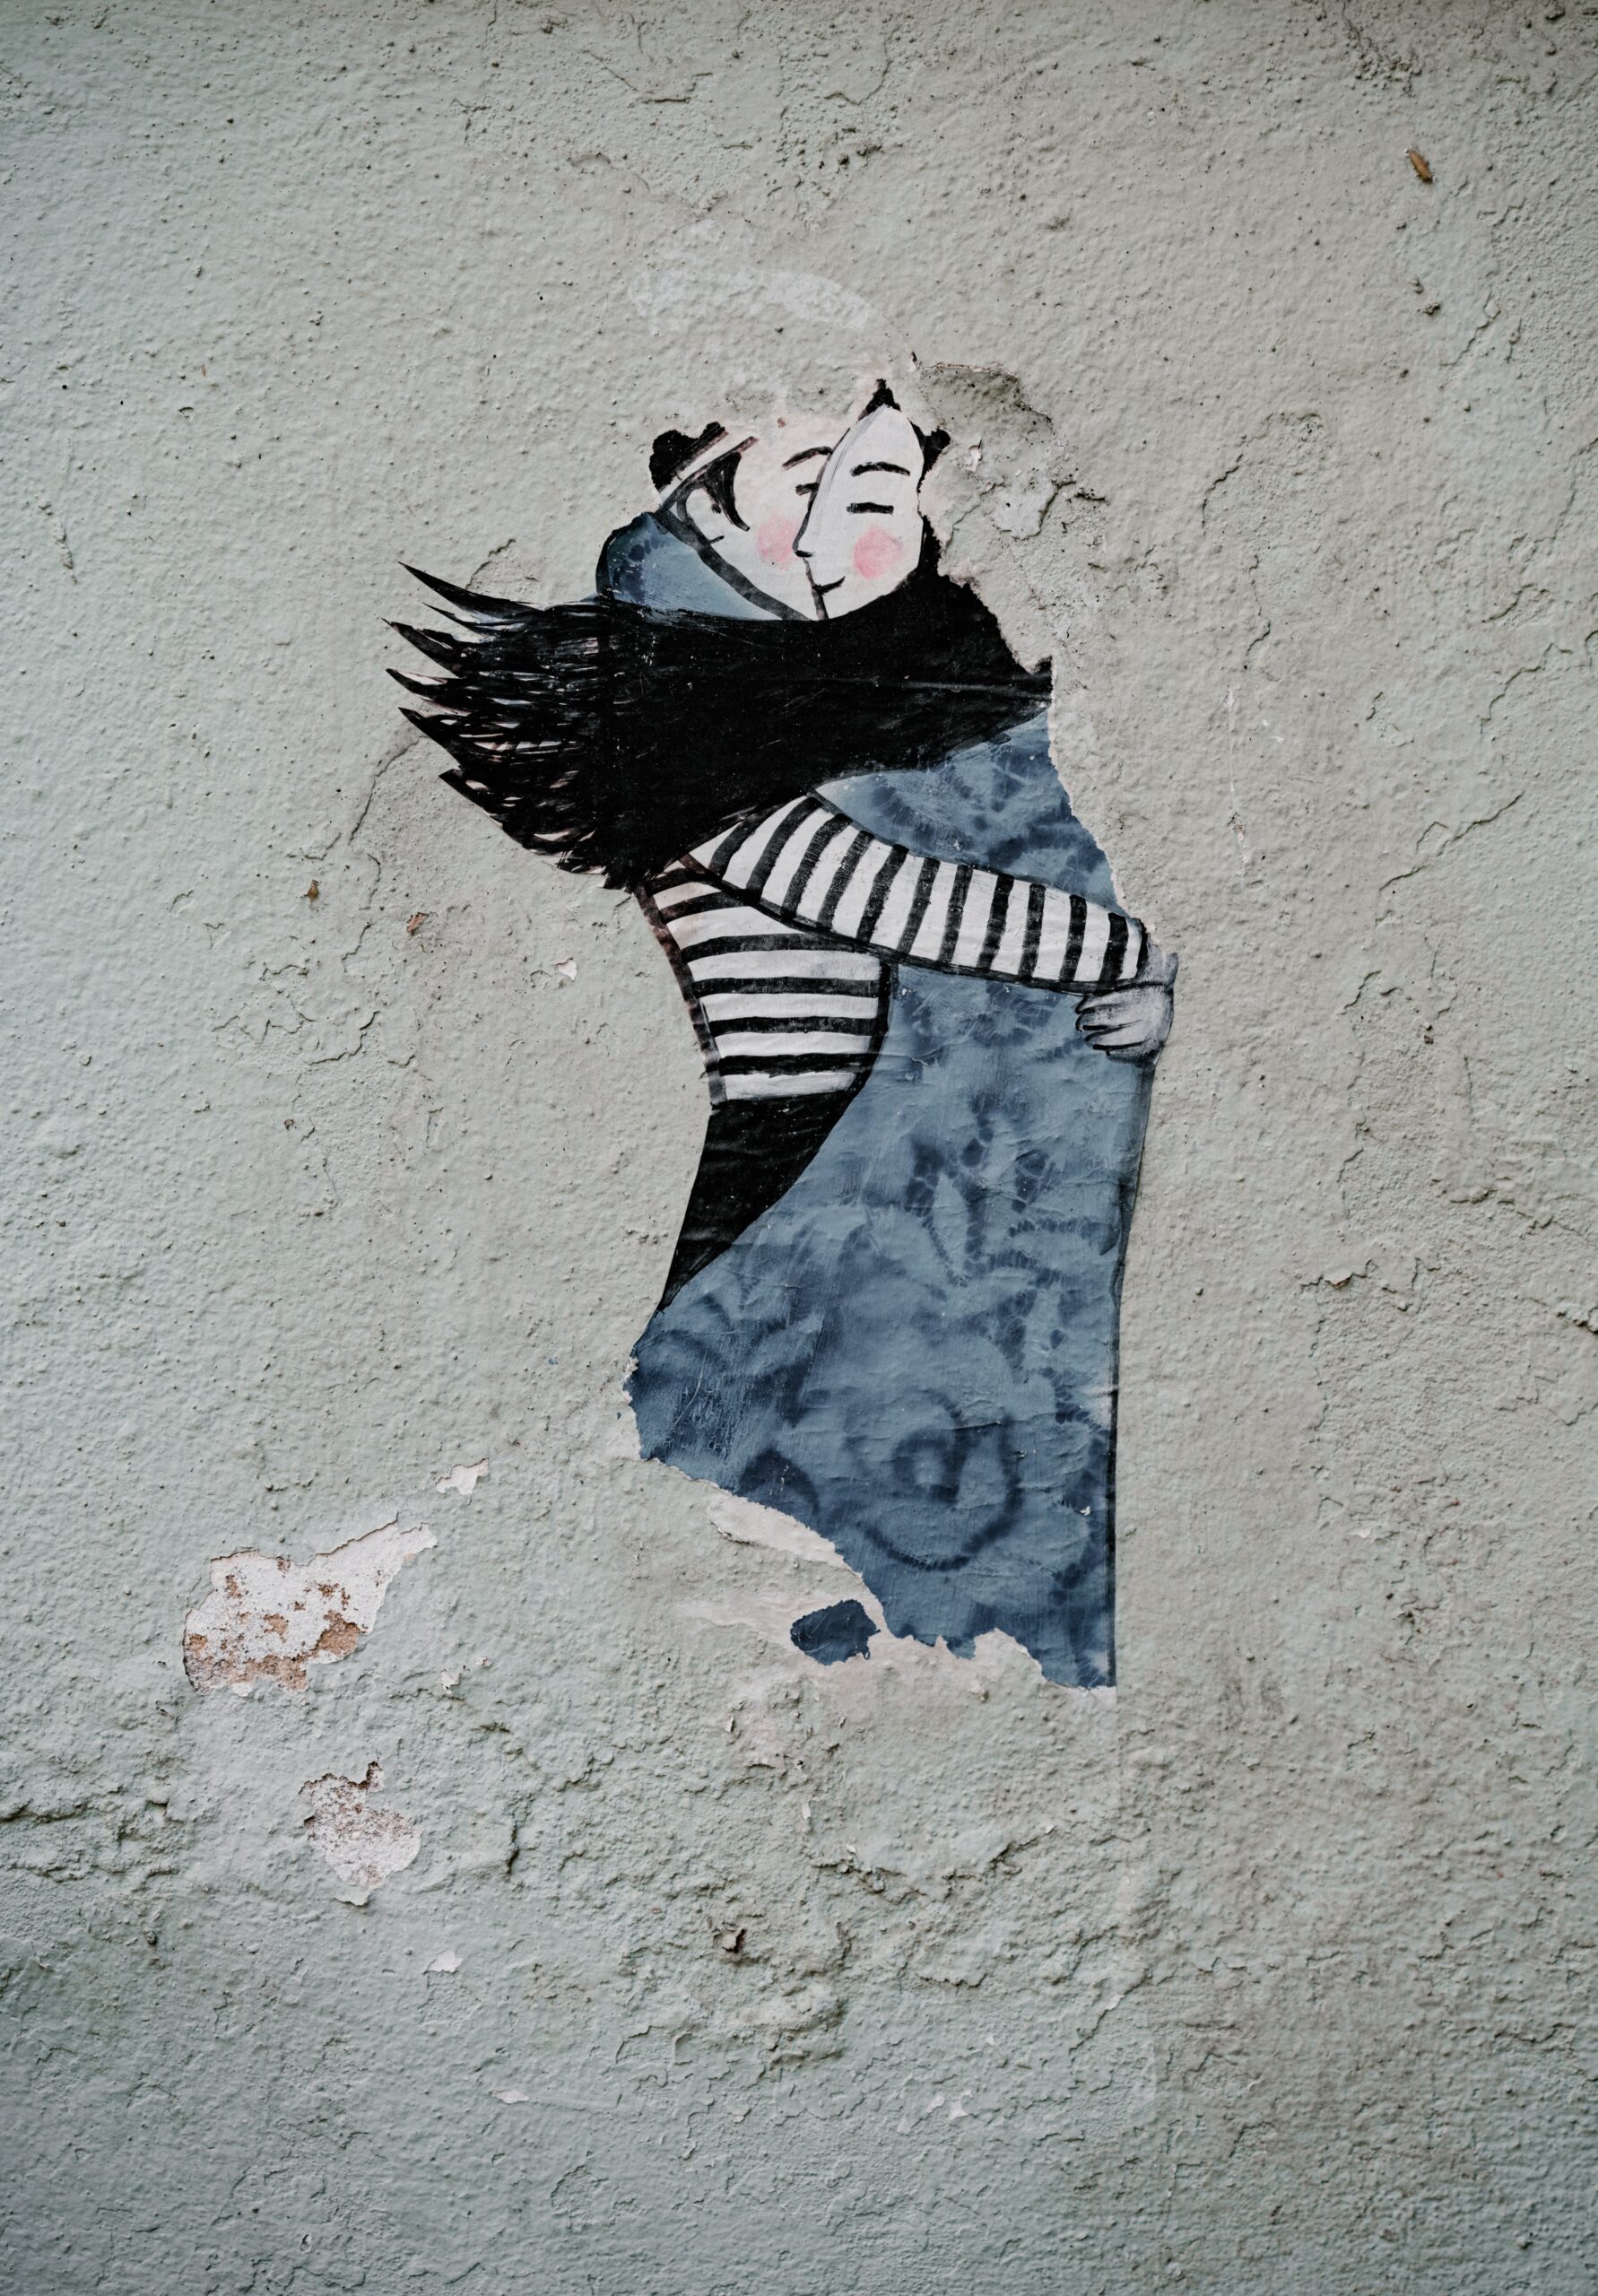 drawing on the wall of a boy and a girl hugging each other indicating care and empathy.